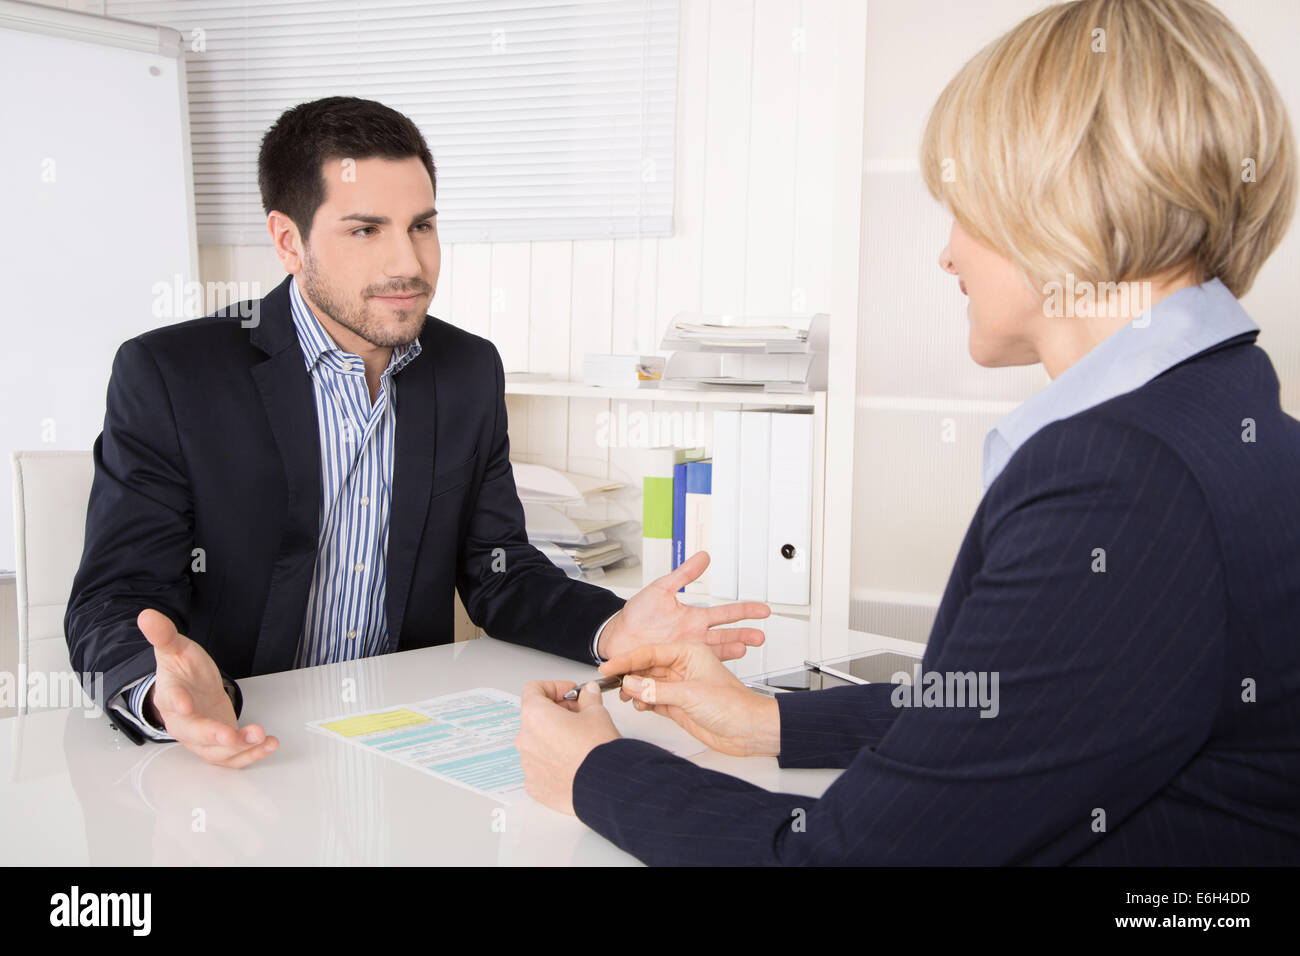 Job interview or meeting situation: business man and woman sitting at desk explaining something. Stock Photo